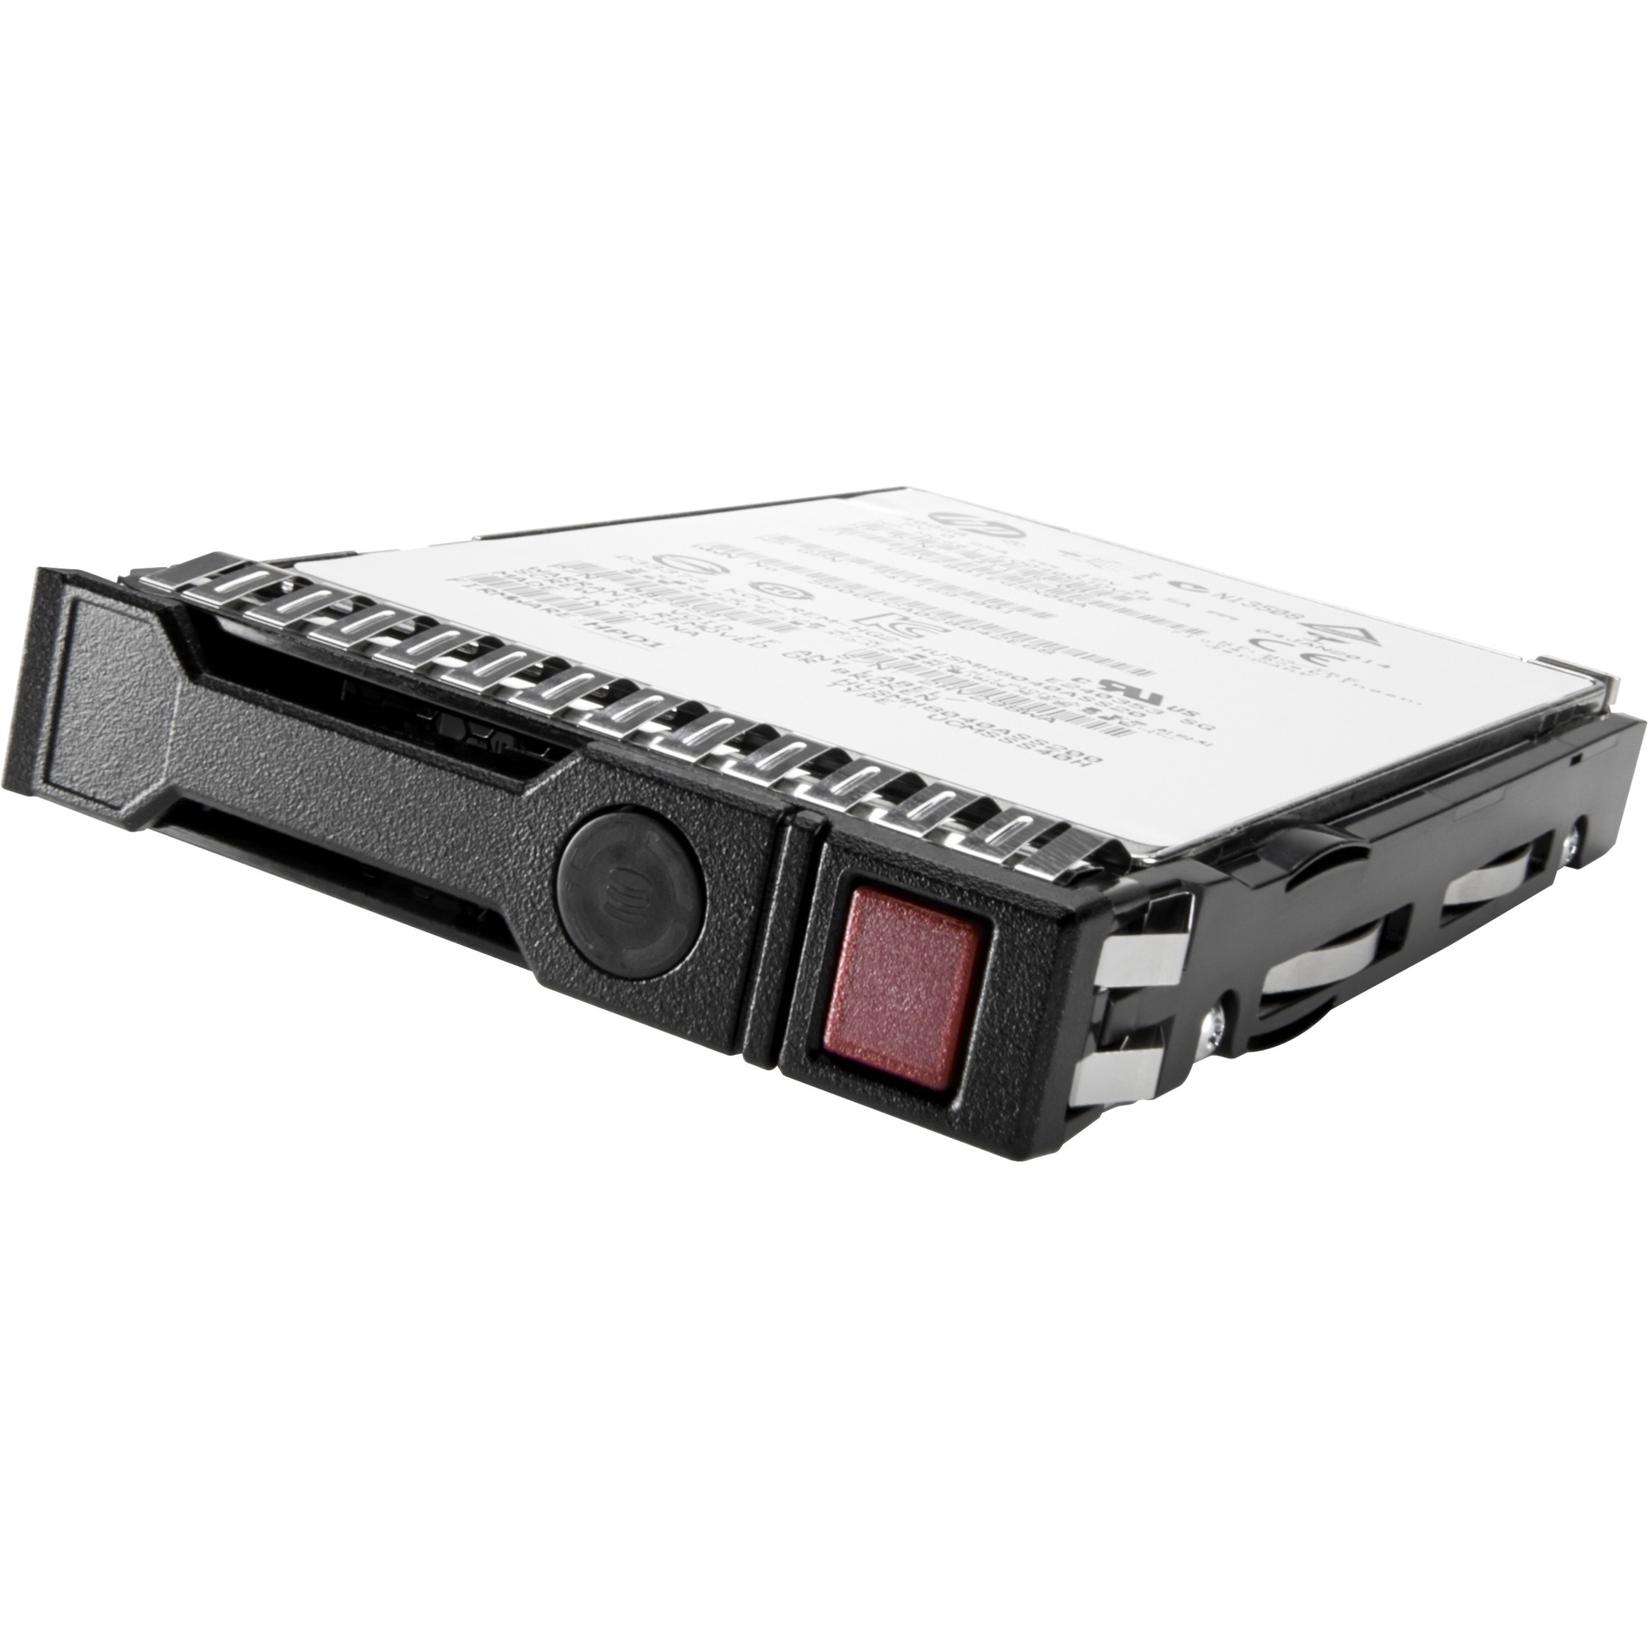 Selected image for HPE HDD 4TB/ SATA/ 6G / 7.2K/ LFF (3.5in)/ Hot plug/ 1Y